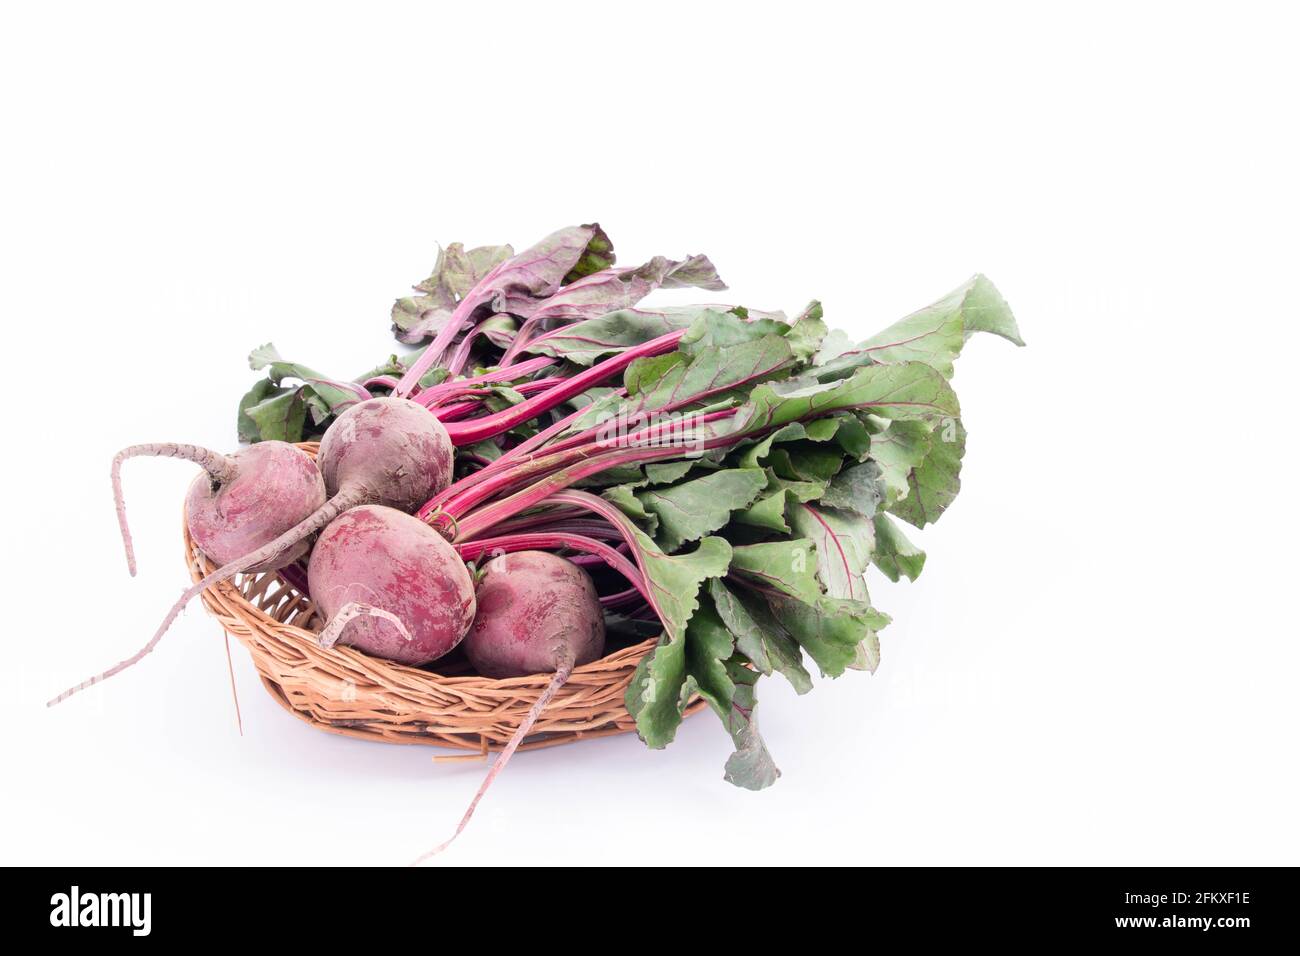 Beetroot Desi Chukandar With Green Leaves Is Consumed As Salad Or Juice. Rich Source Of Iron And Fiber Strengthens Liver And Helps Recover From Iron D Stock Photo